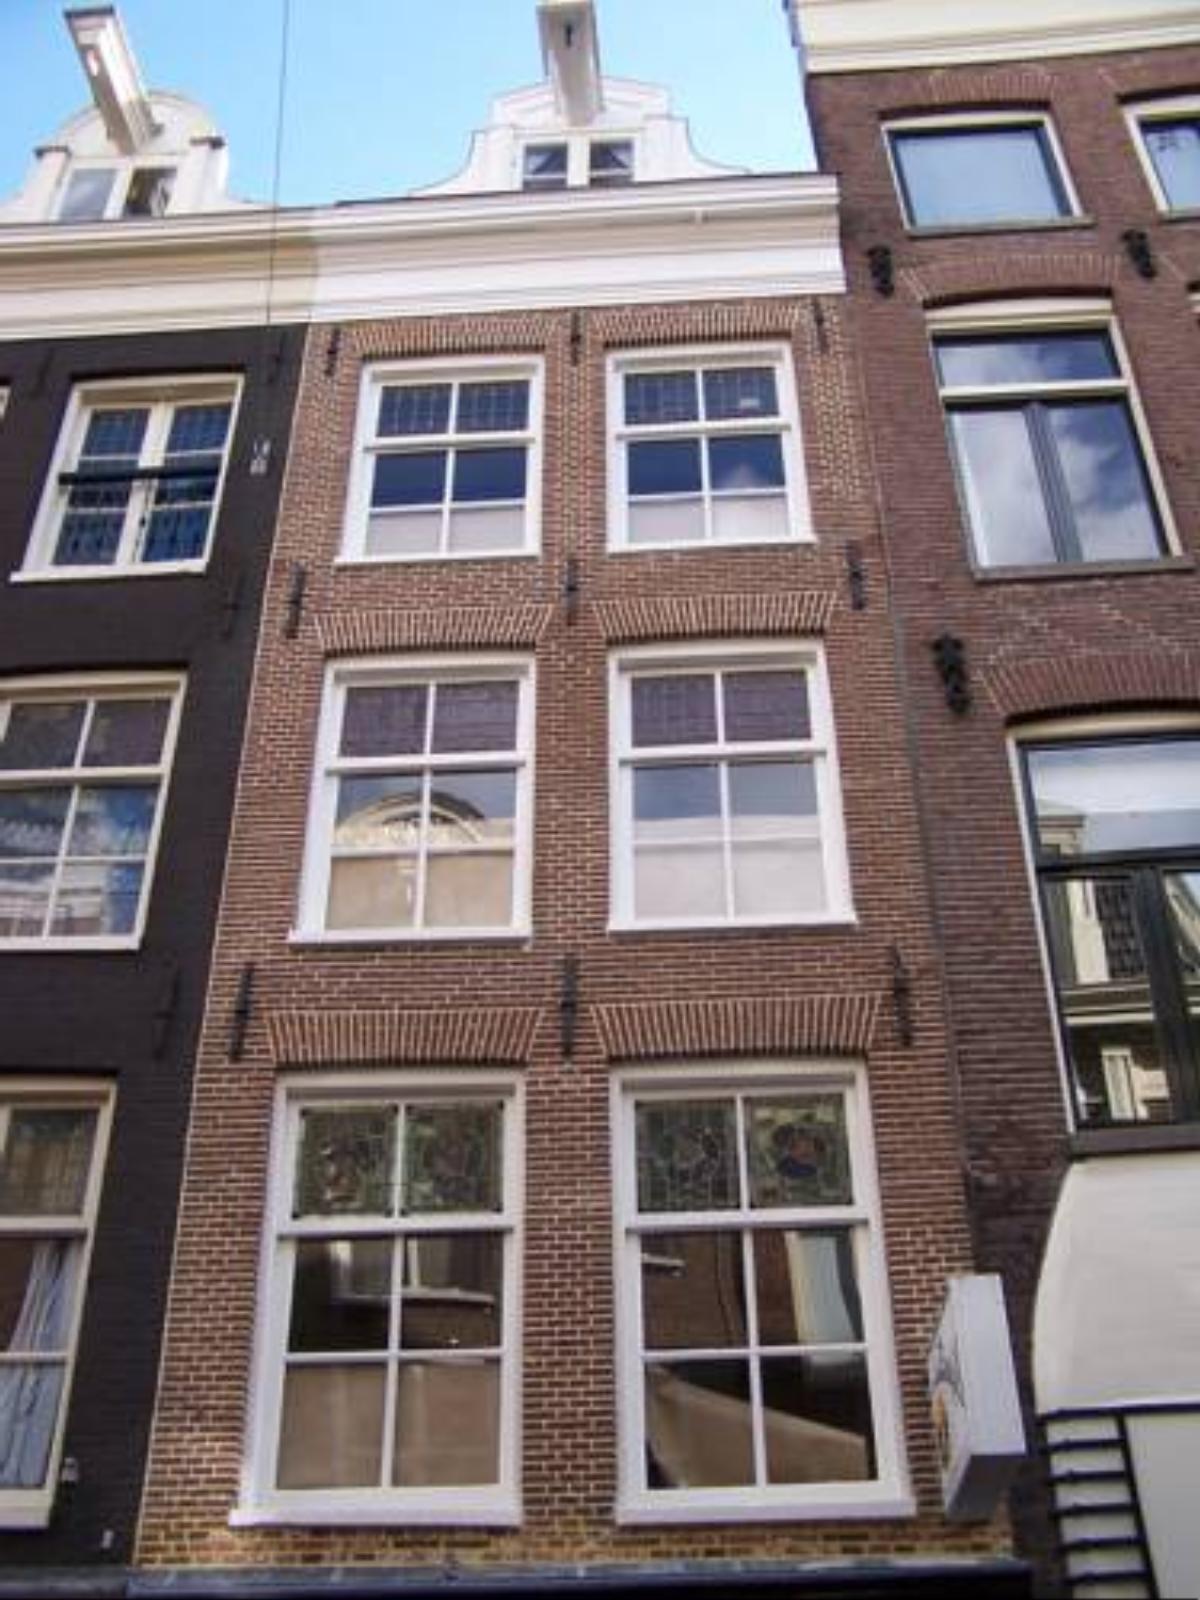 Bed & Breakfast The 9 Streets Hotel Amsterdam Netherlands